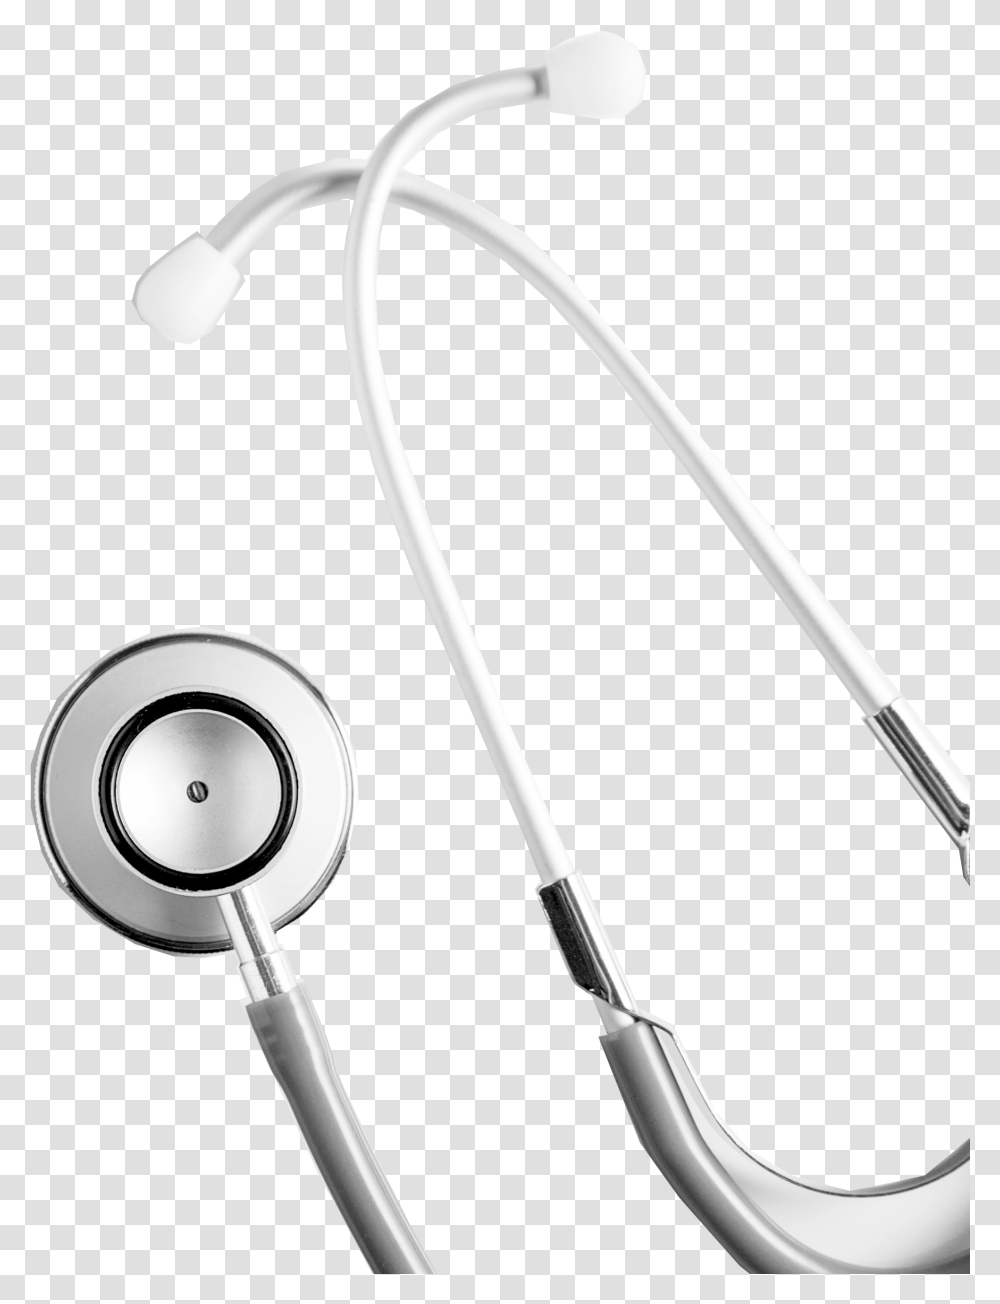 Stethoscope Good News From Finland Bathroom Scale, Shower Faucet, Electronics, Headphones, Headset Transparent Png